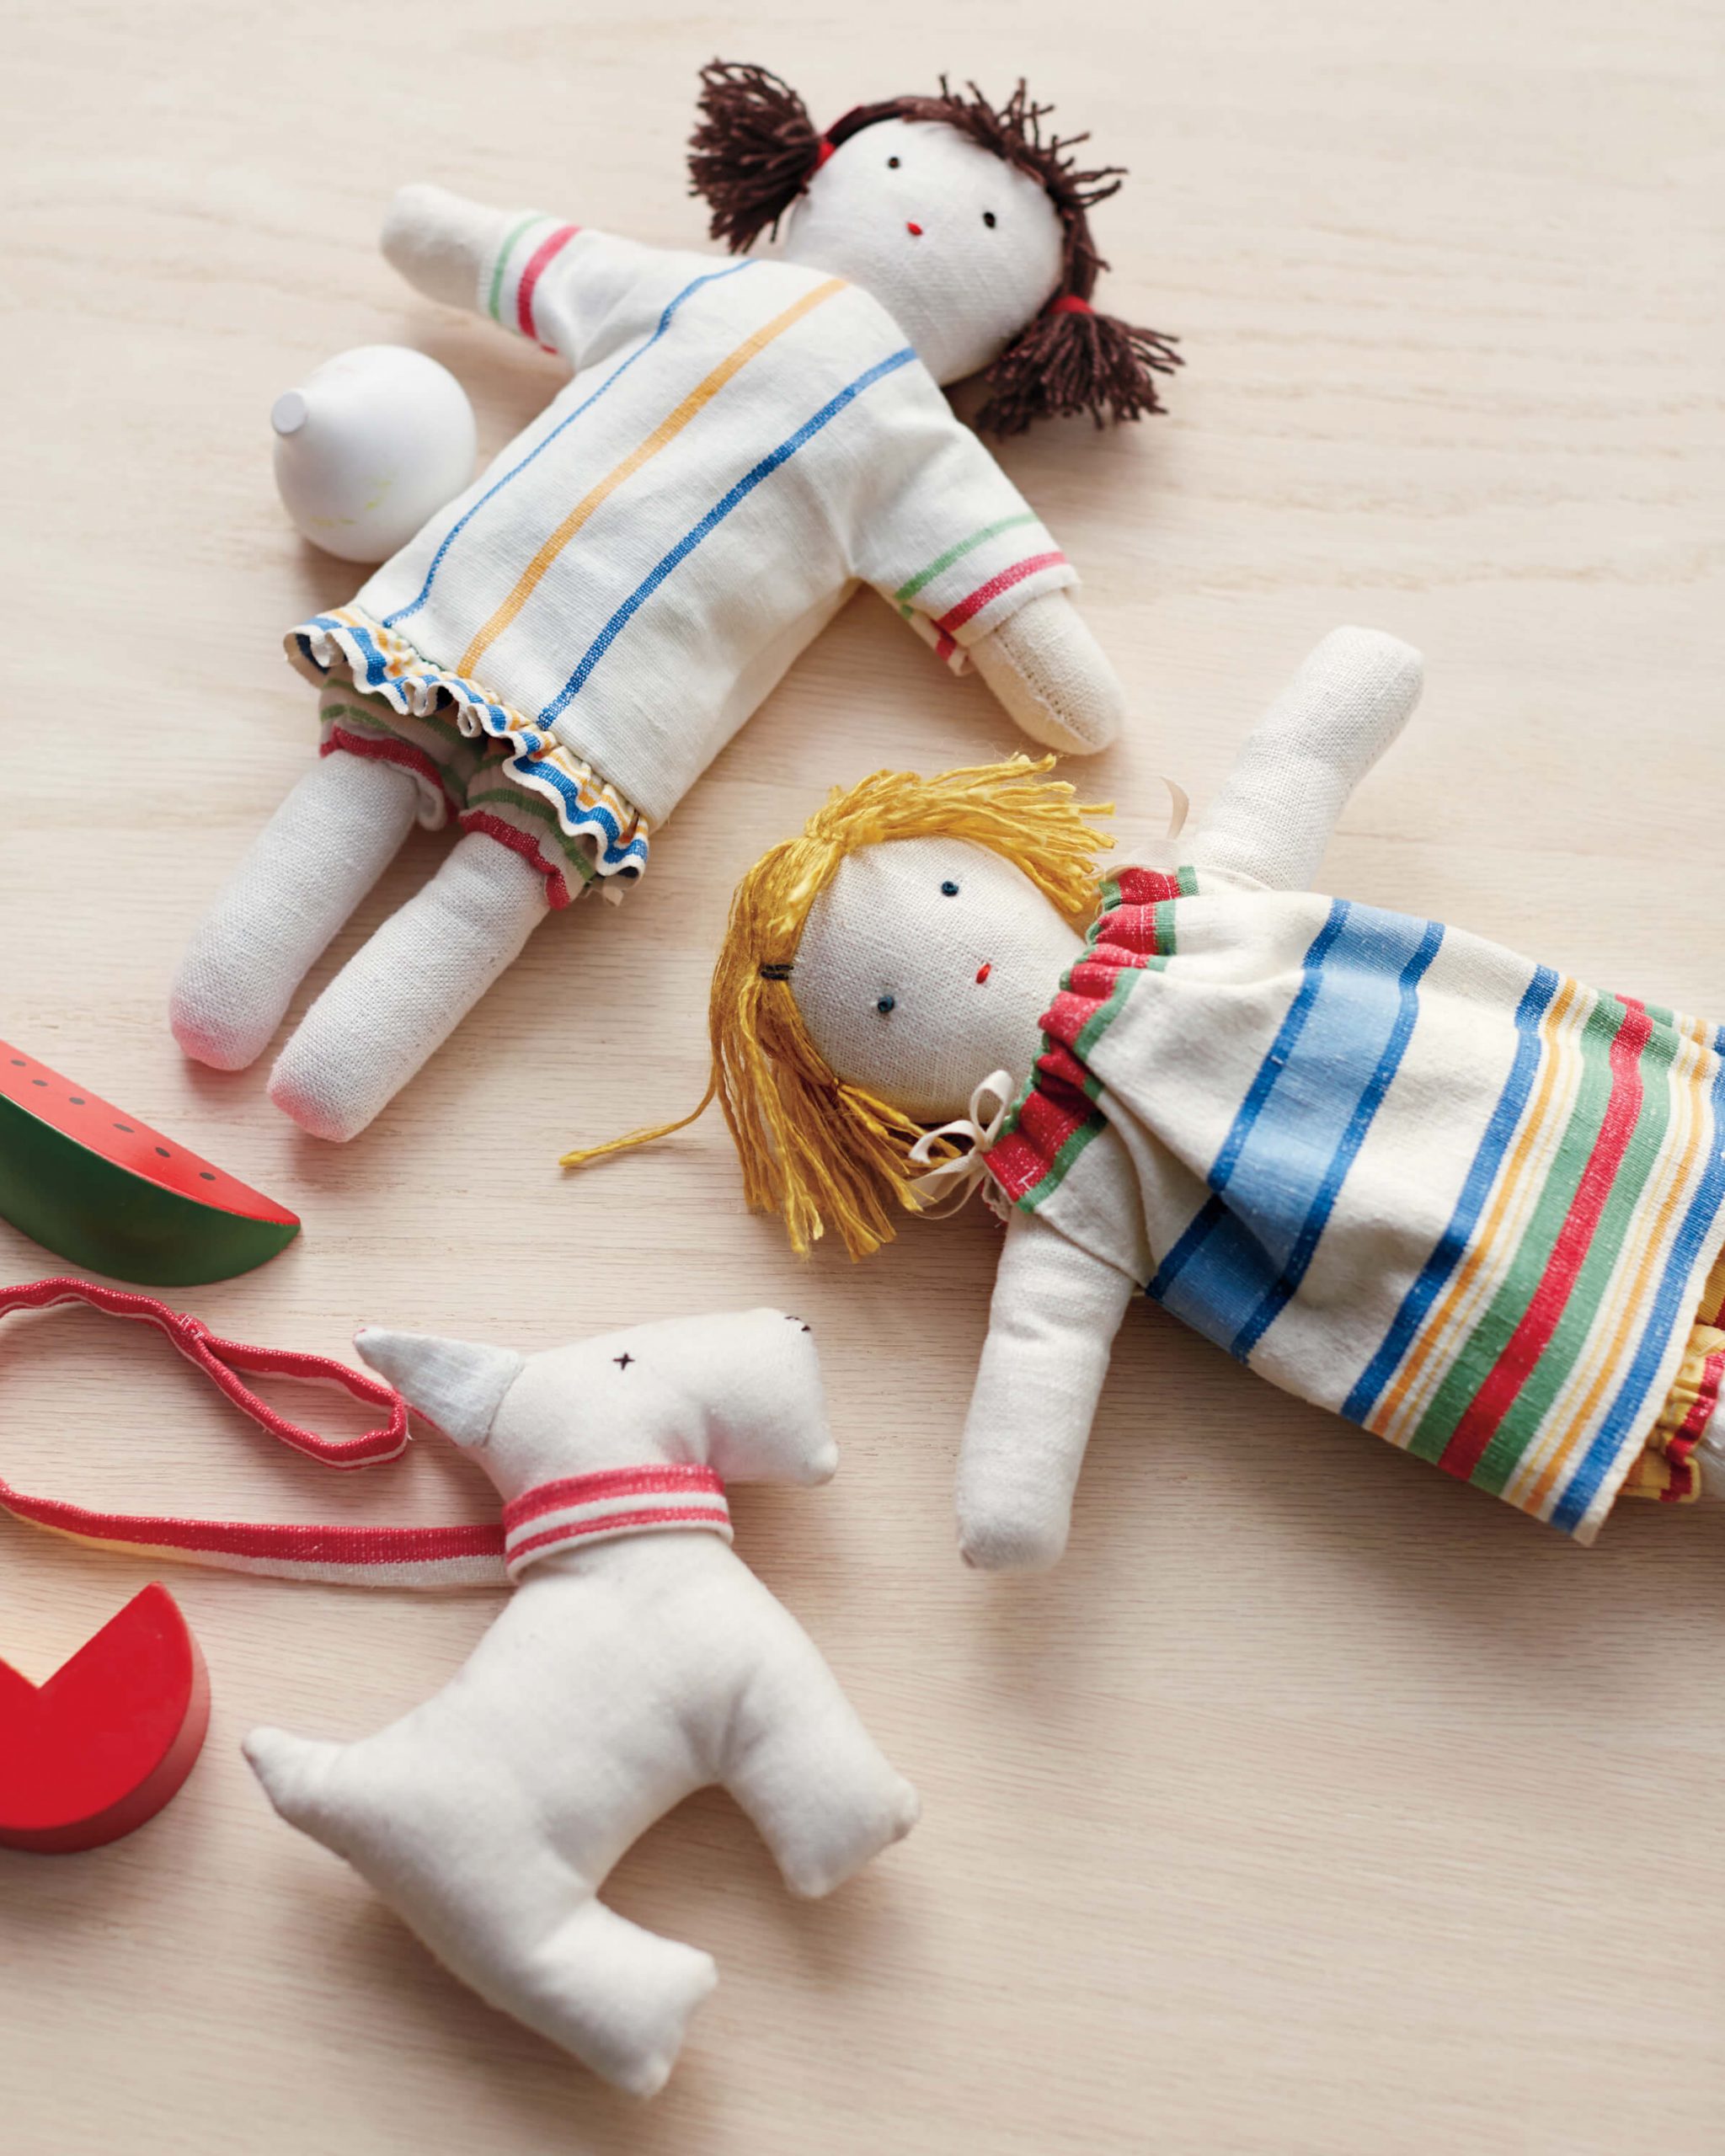 15 Adorable DIY Dolls you can Make Yourself